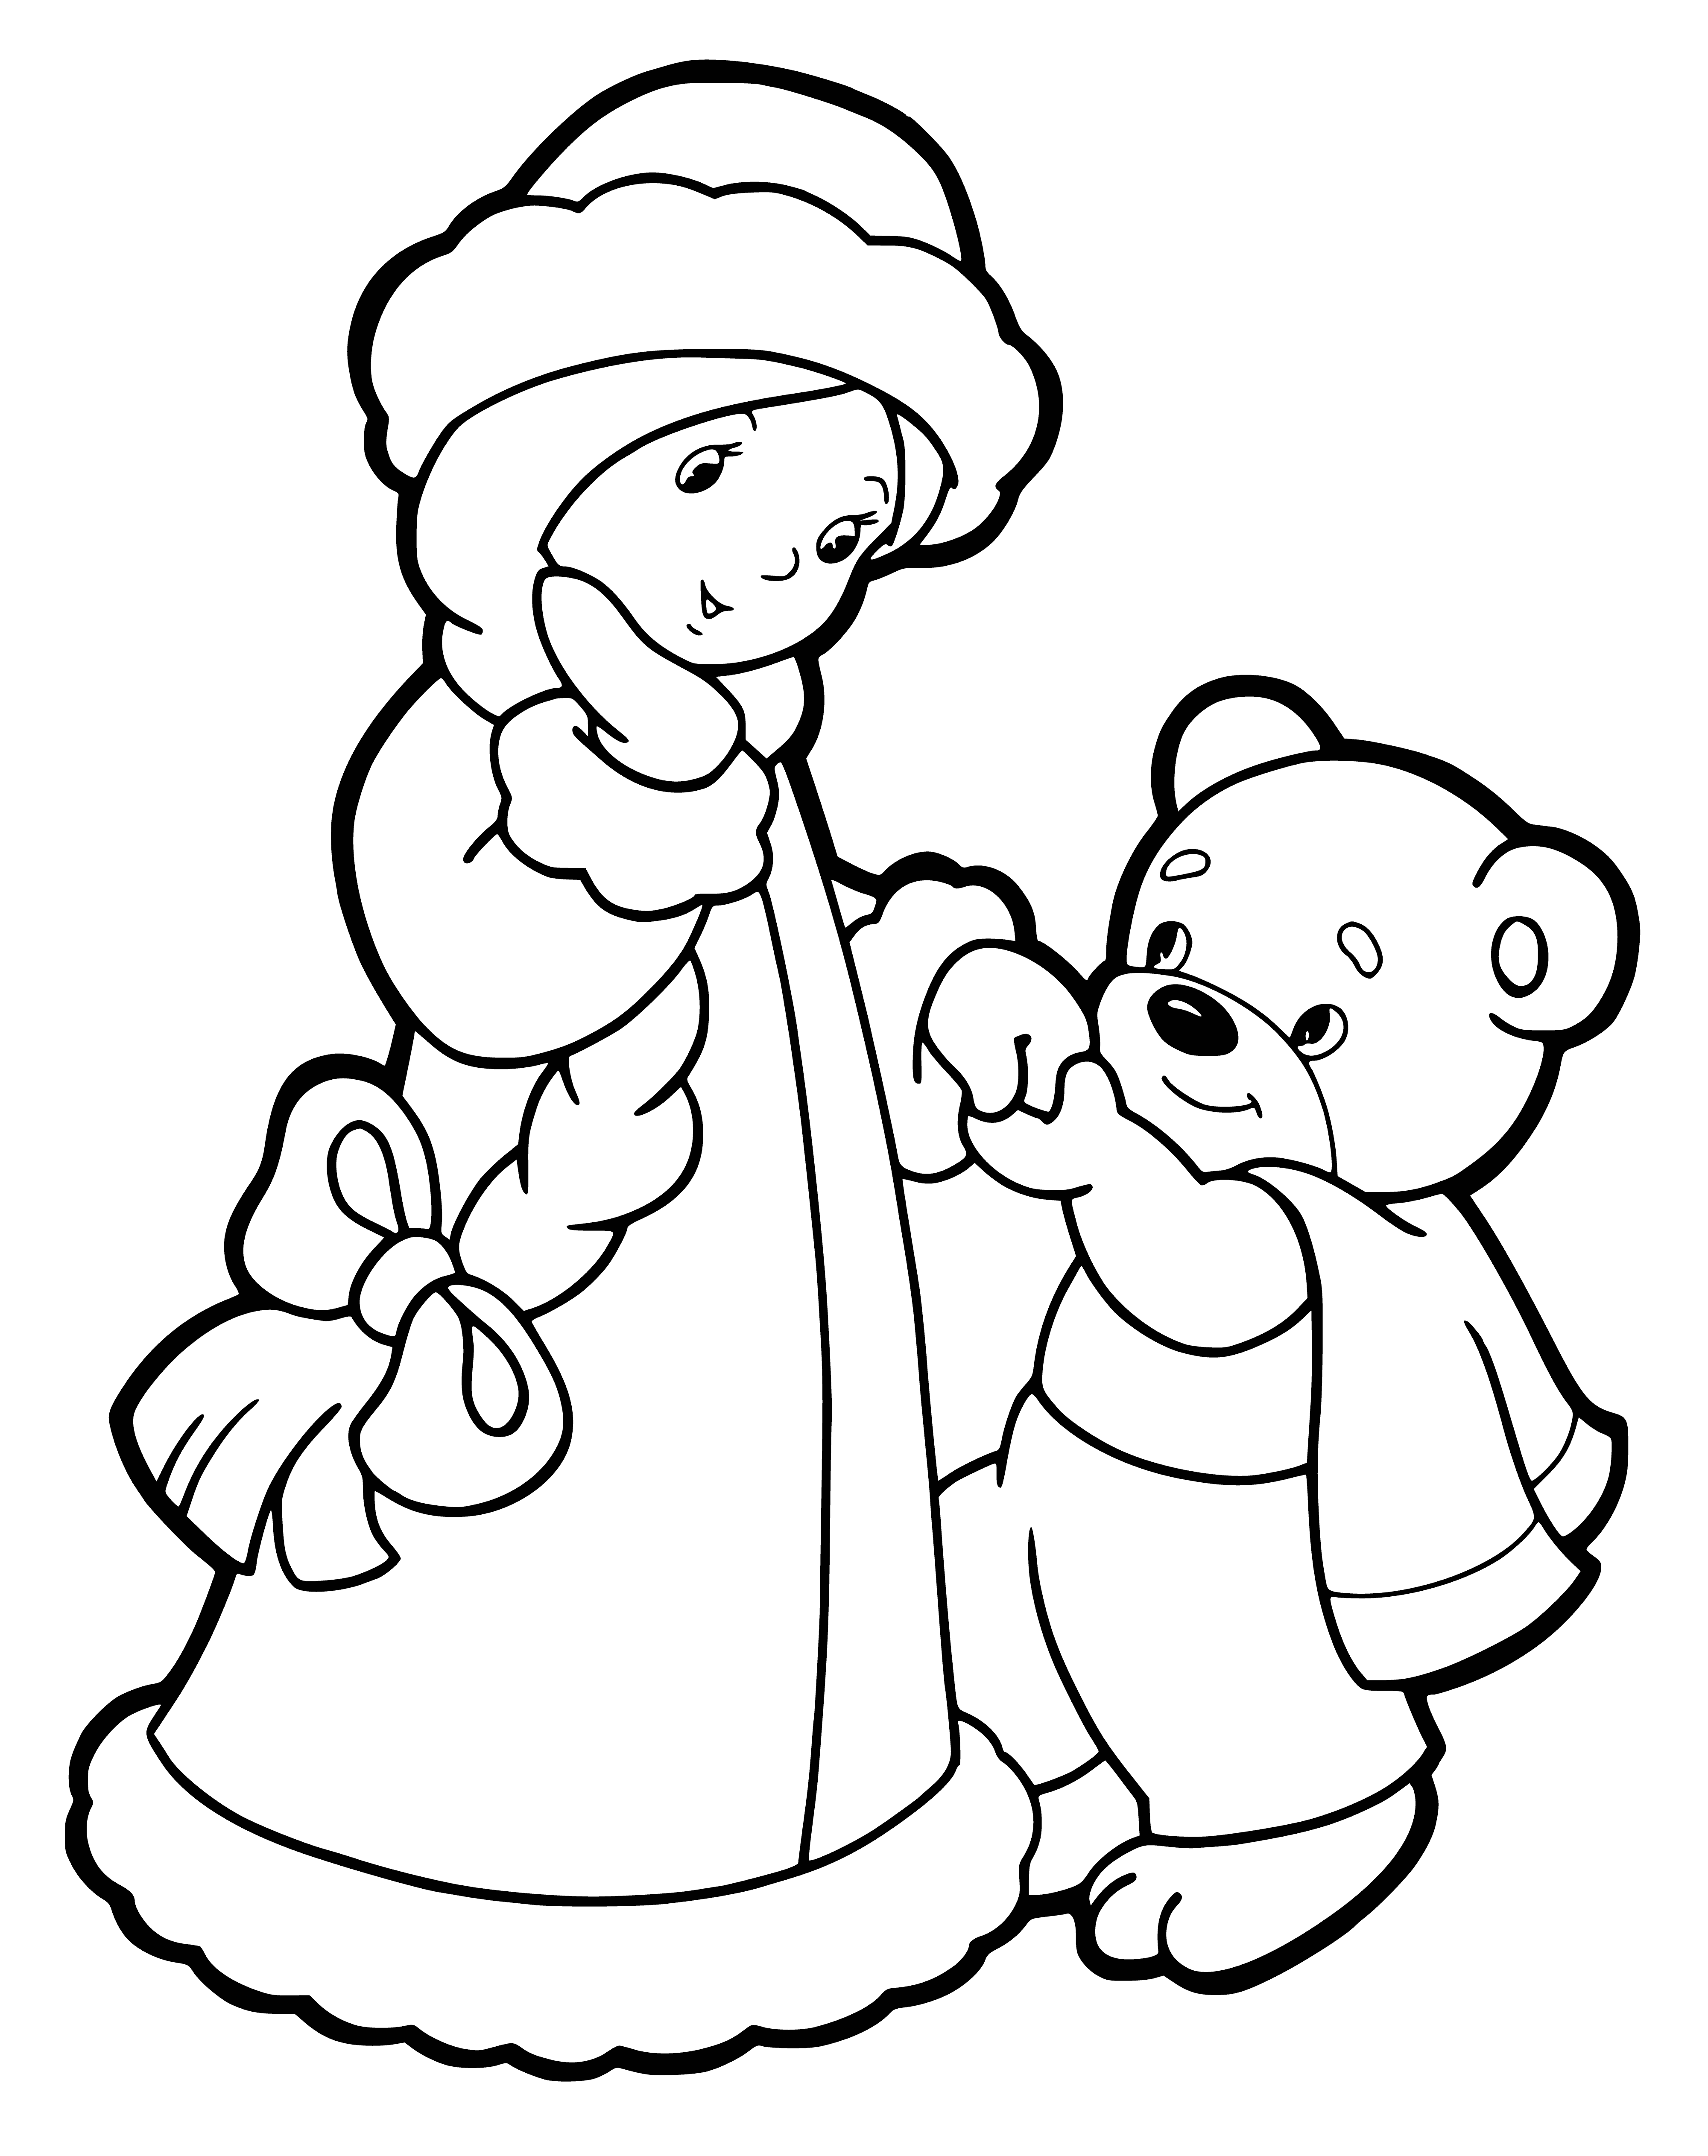 coloring page: Snow Maiden in white dress holding teddy bear; hat w/ red ribbon, bear brown. #coloringpage #snowmaiden #teddybear